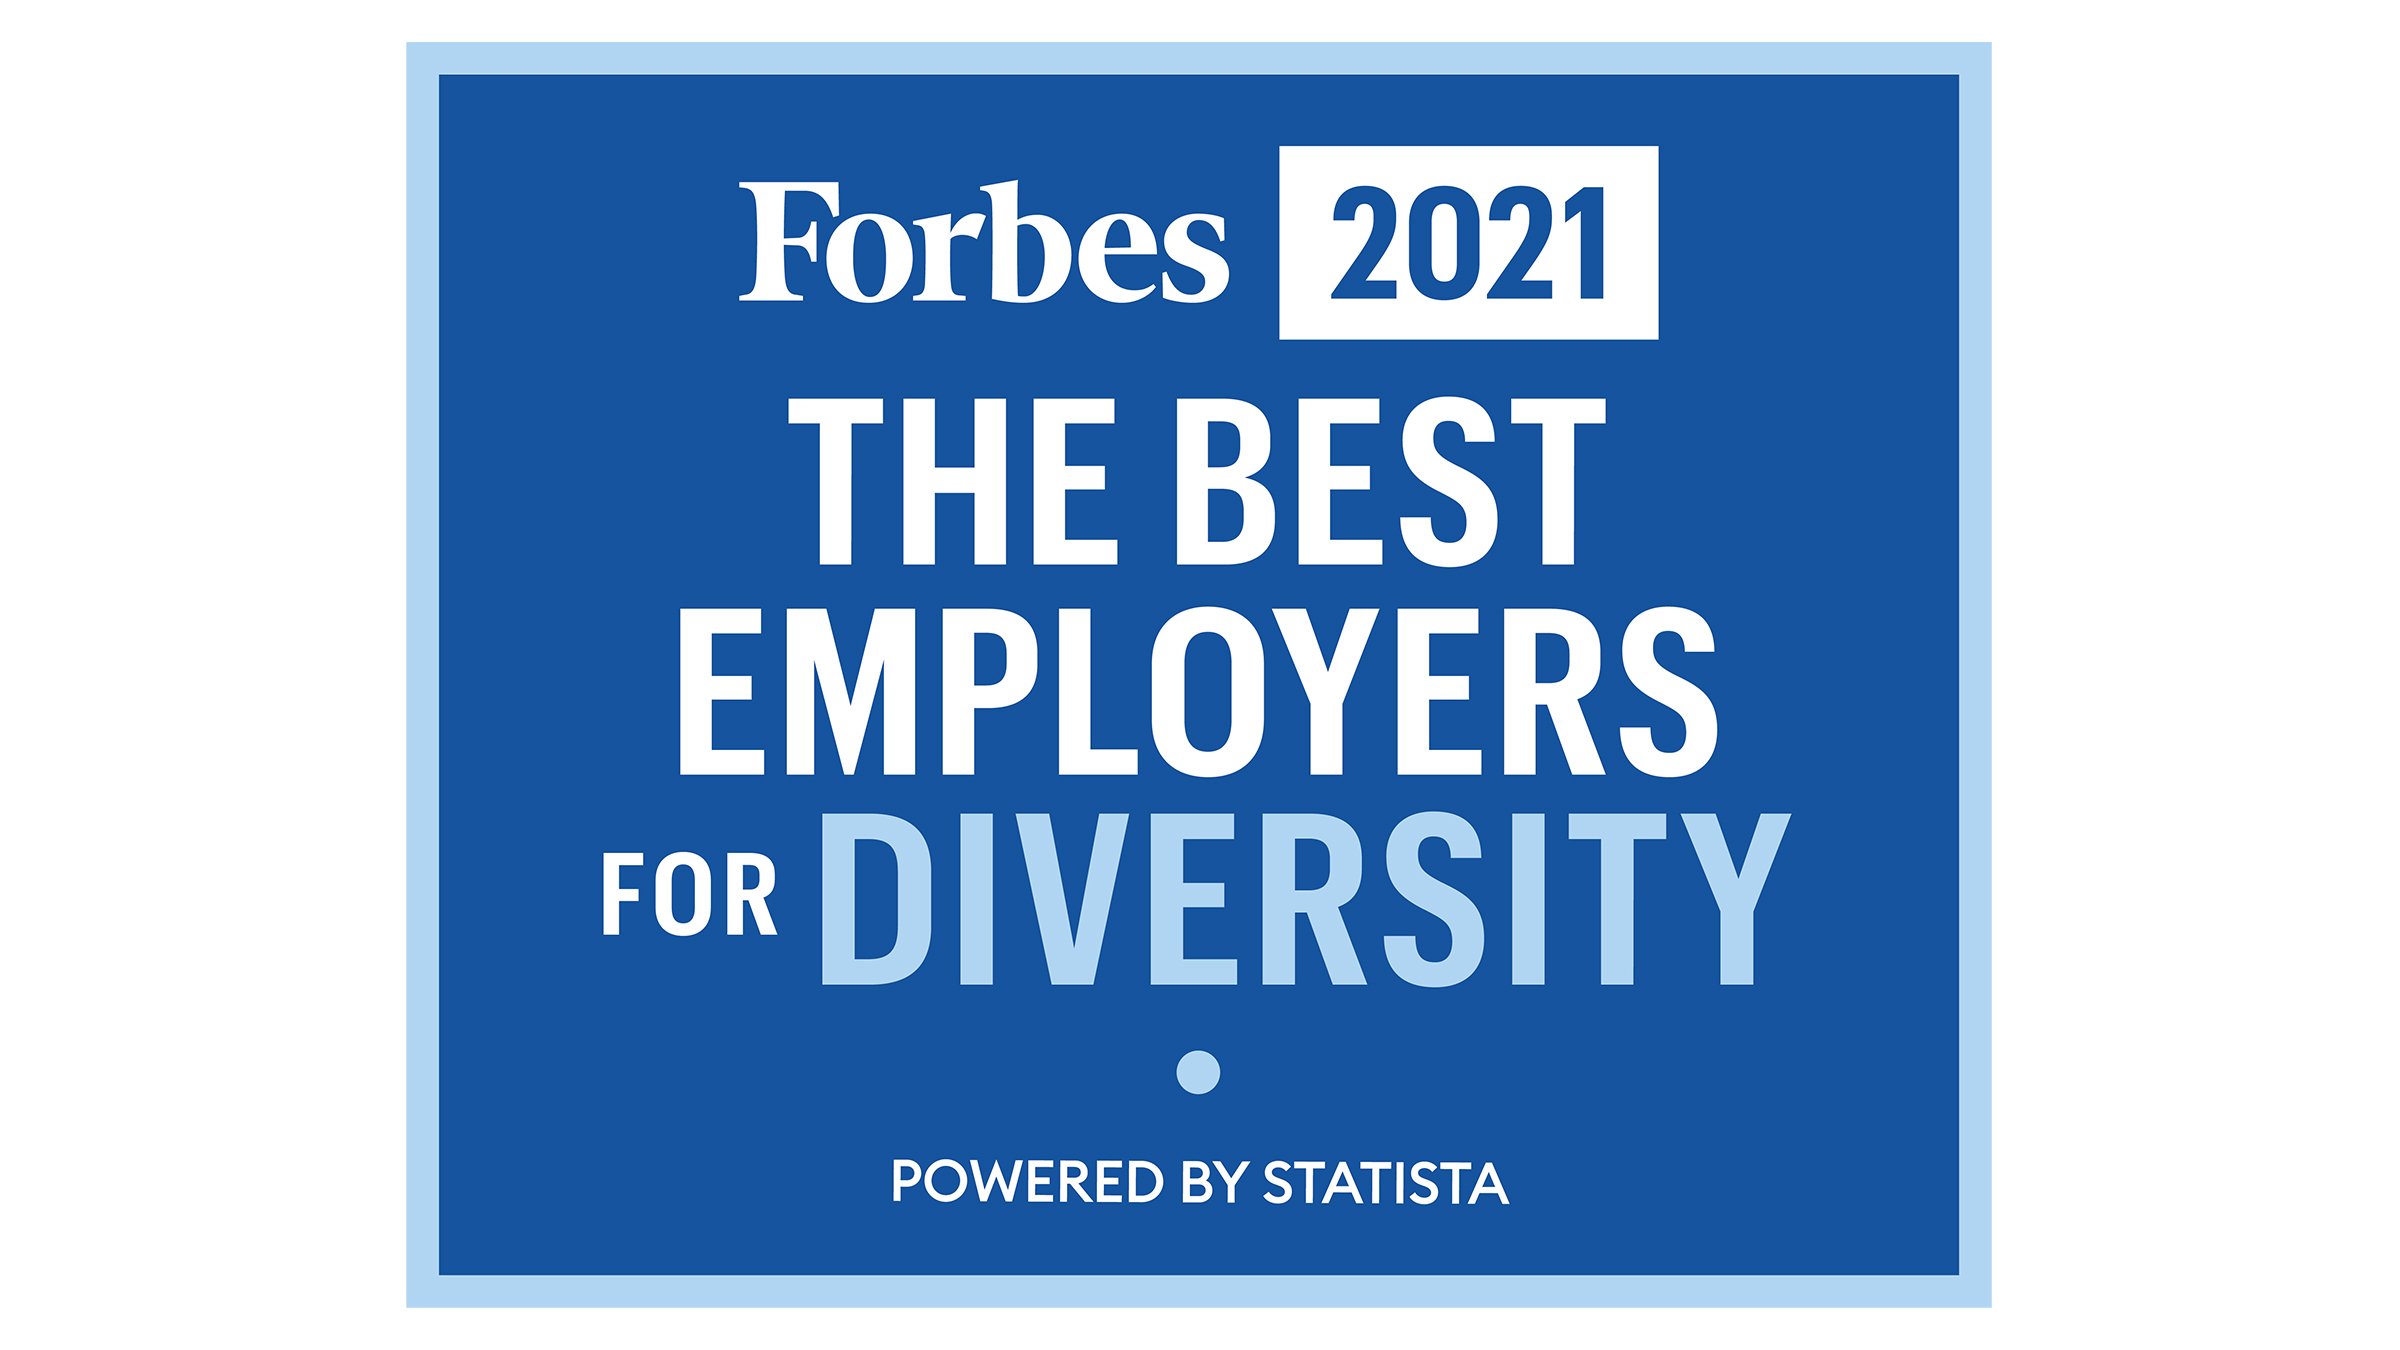 Forbes The Best Employers for Diversity